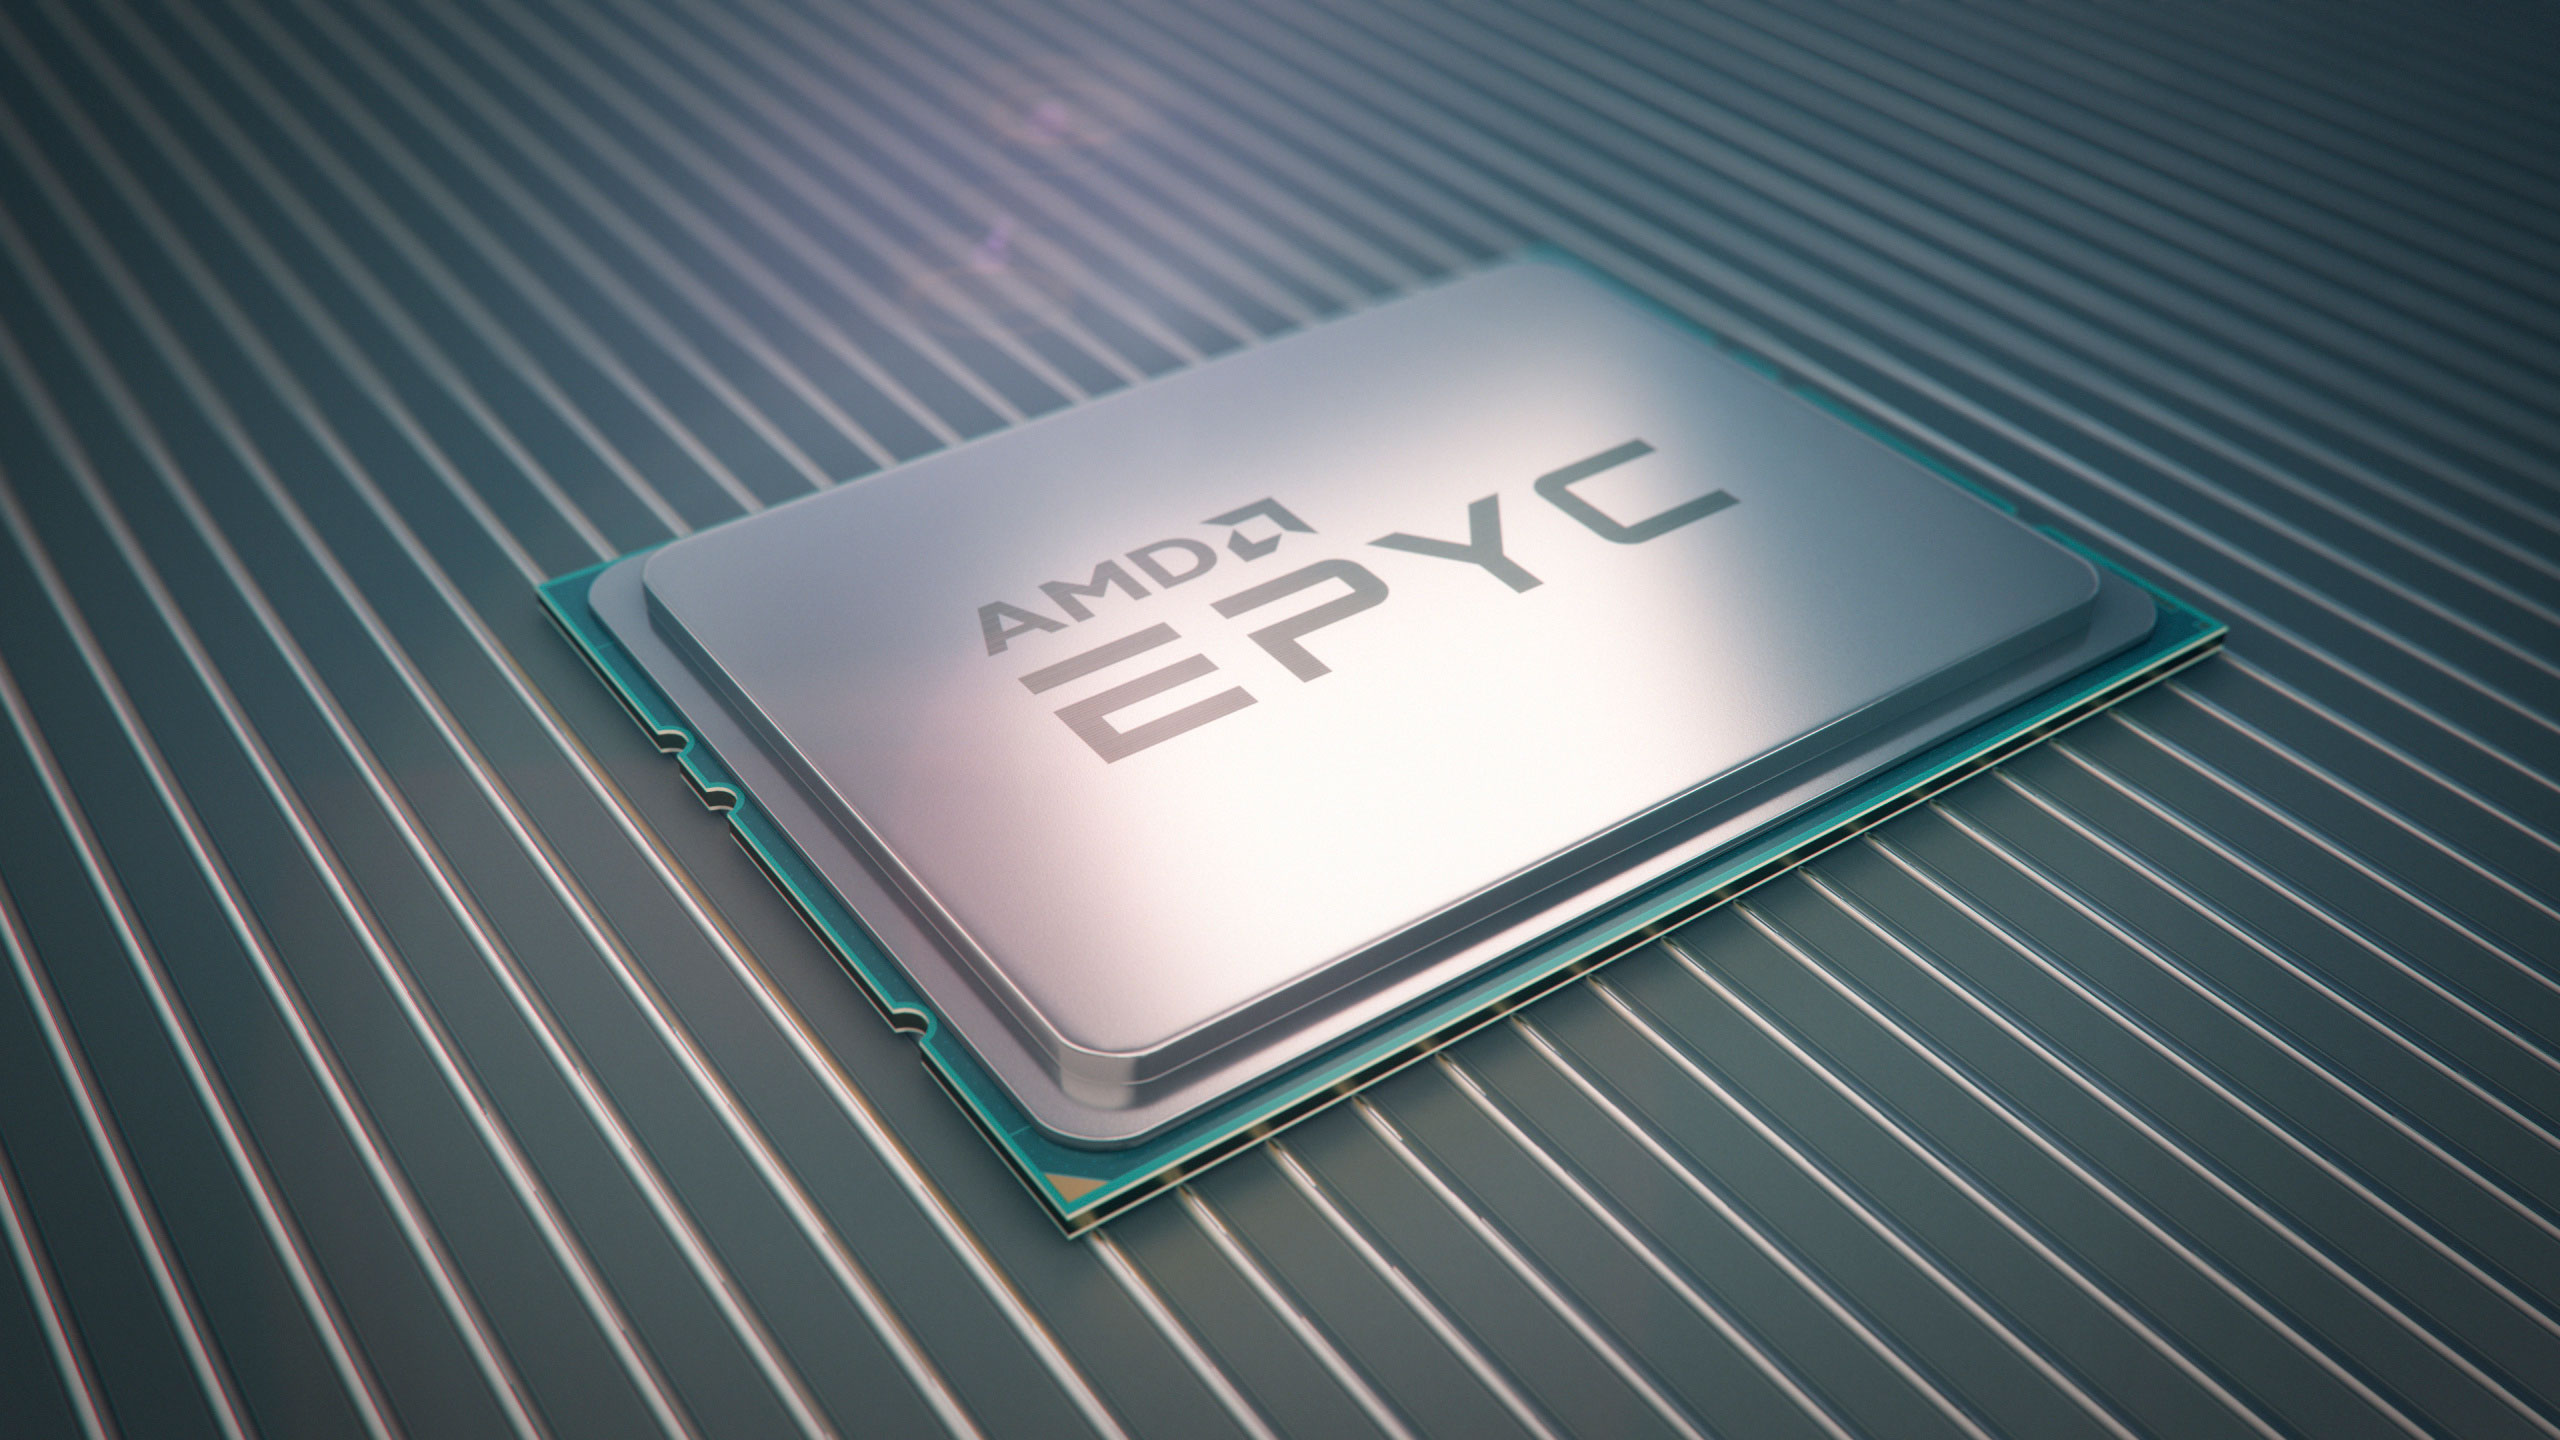 AMD to Launch 3rd Generation EPYC on March 15th: Milan with Zen 3